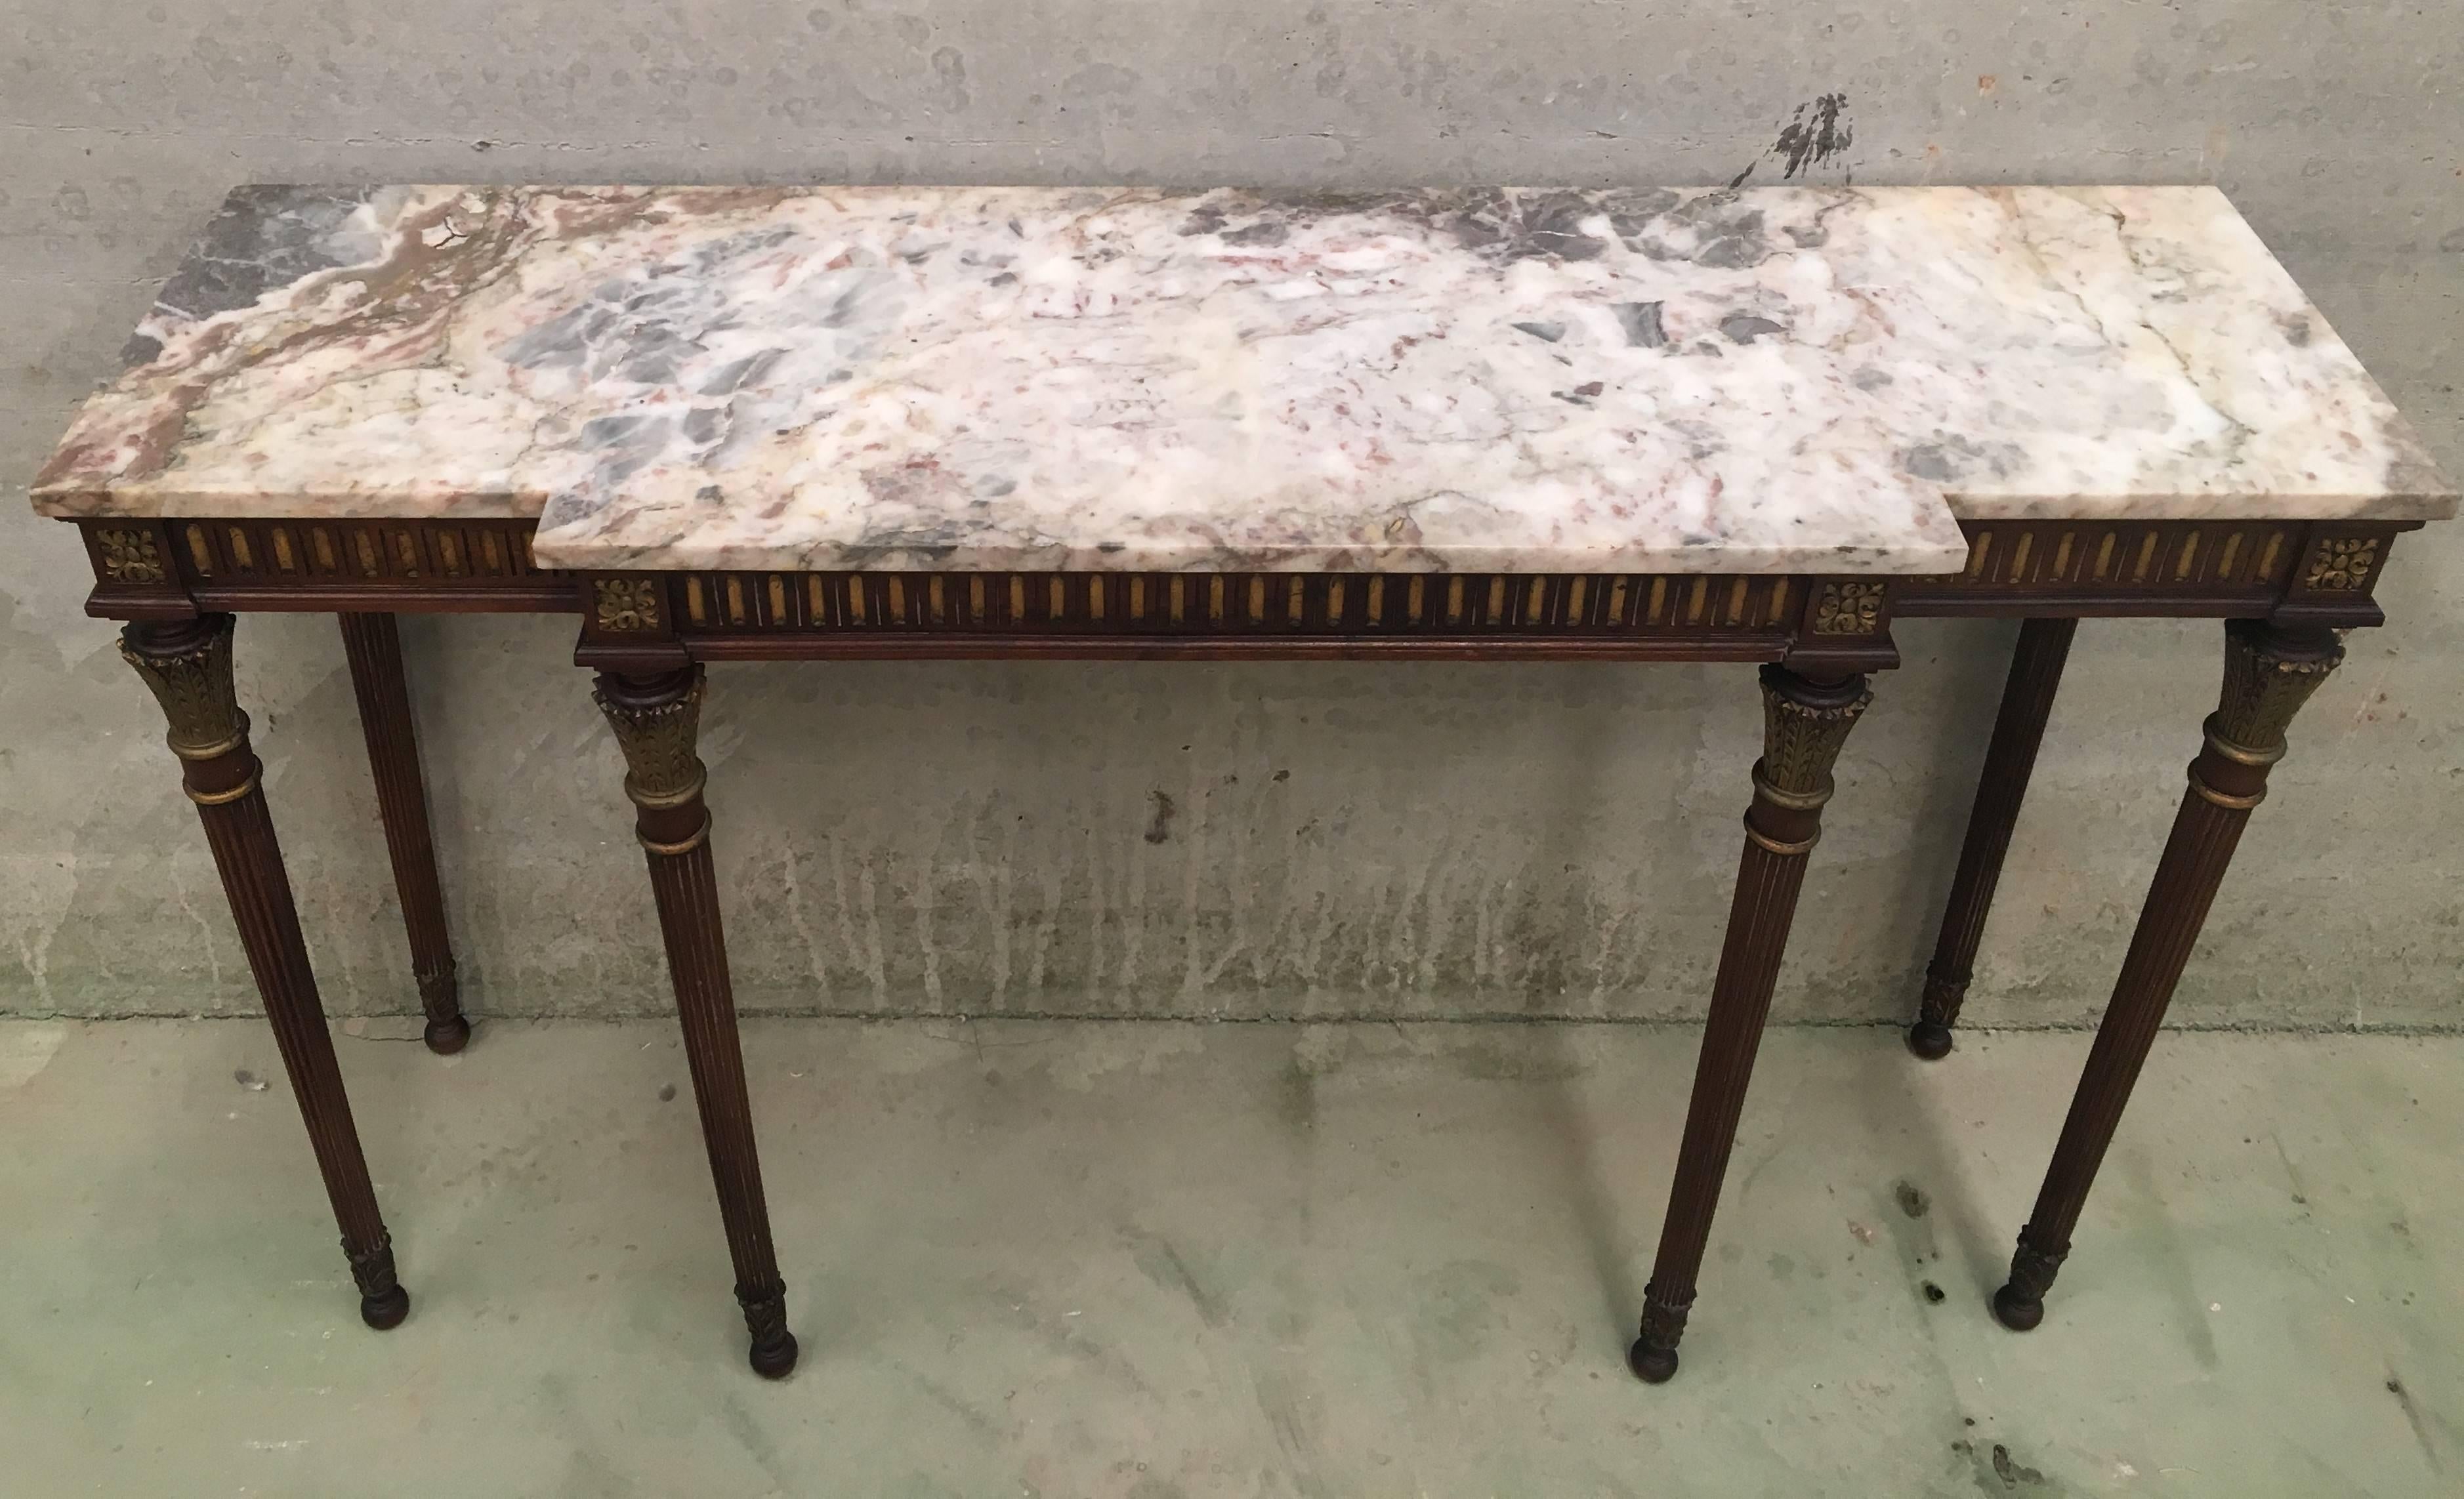 20th Century French Louis XVI Style Gilt Decorated Wooden Console Table with Marble Top